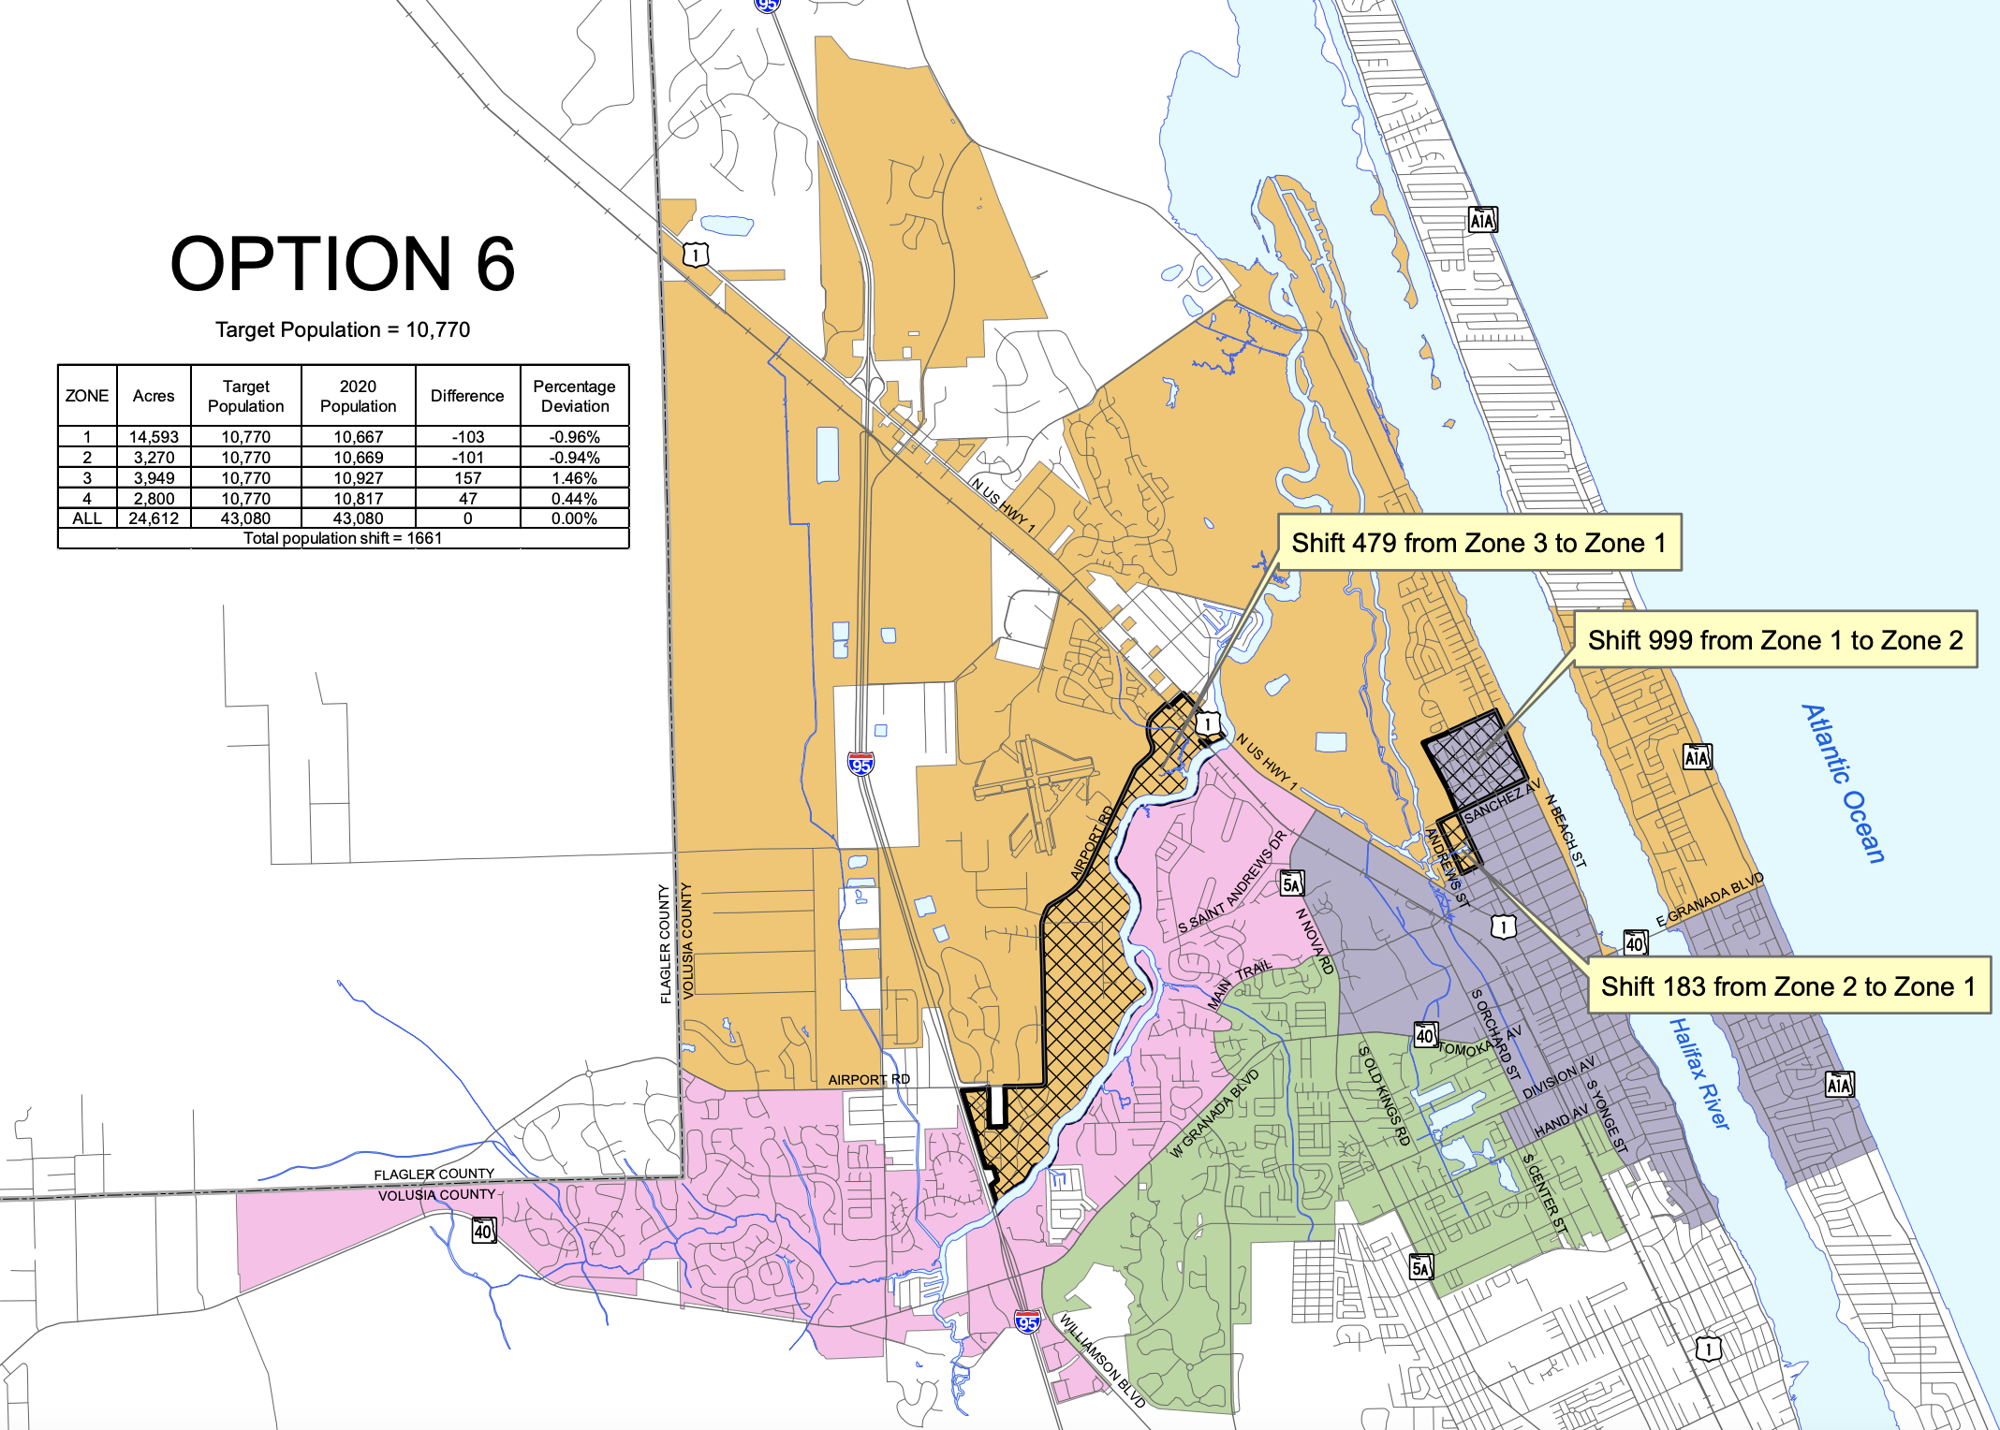 A map showing “Option 6,” the favored redistricting plan by the Ormond Beach City Commission, though some modifications were made at the workshop. Map courtesy of the city of Ormond Beach